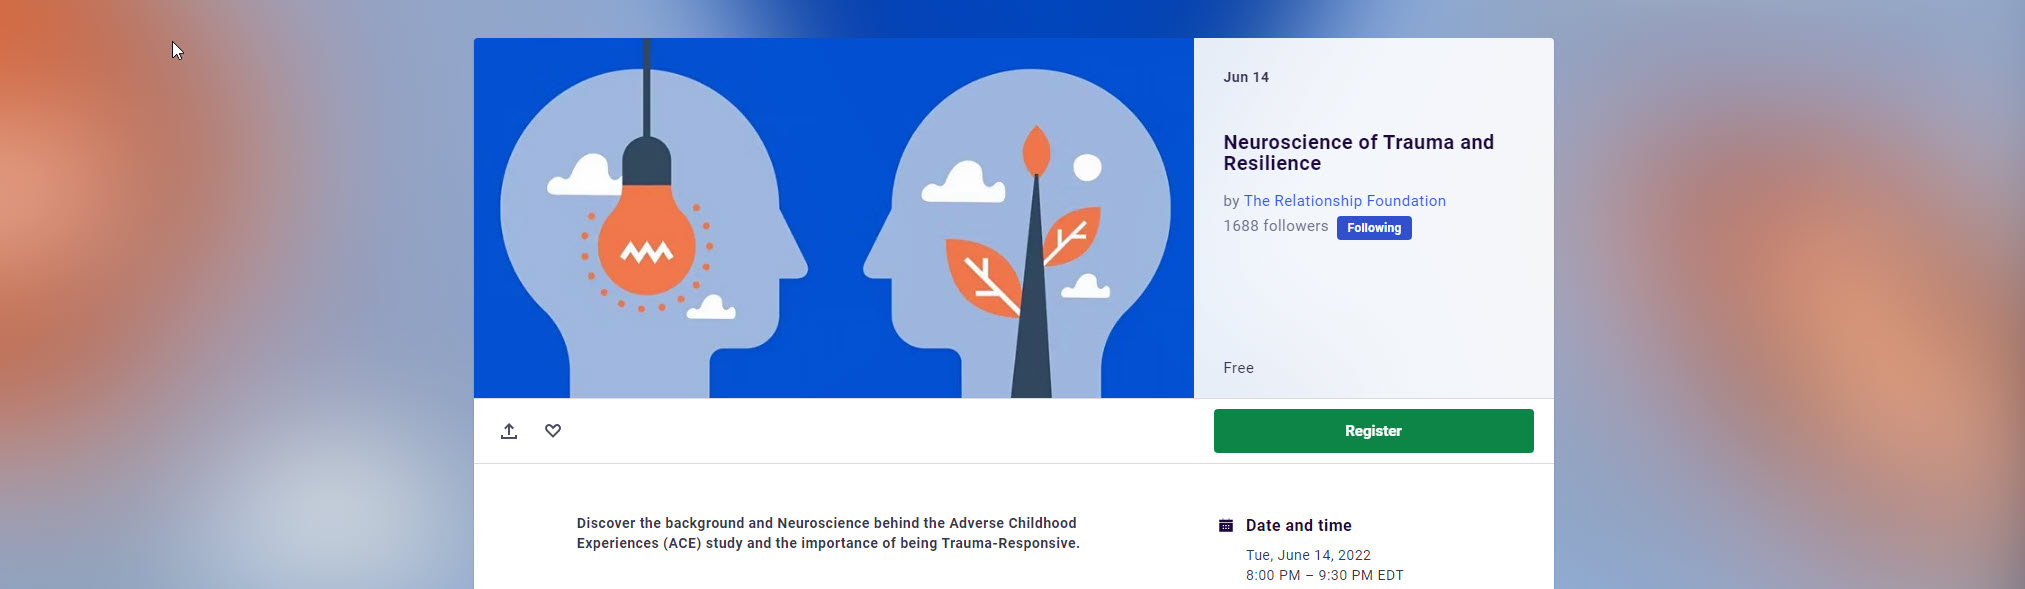 The Relationship Foundation Eventbrite Neuroscience of Trauma and Resilience Online Event